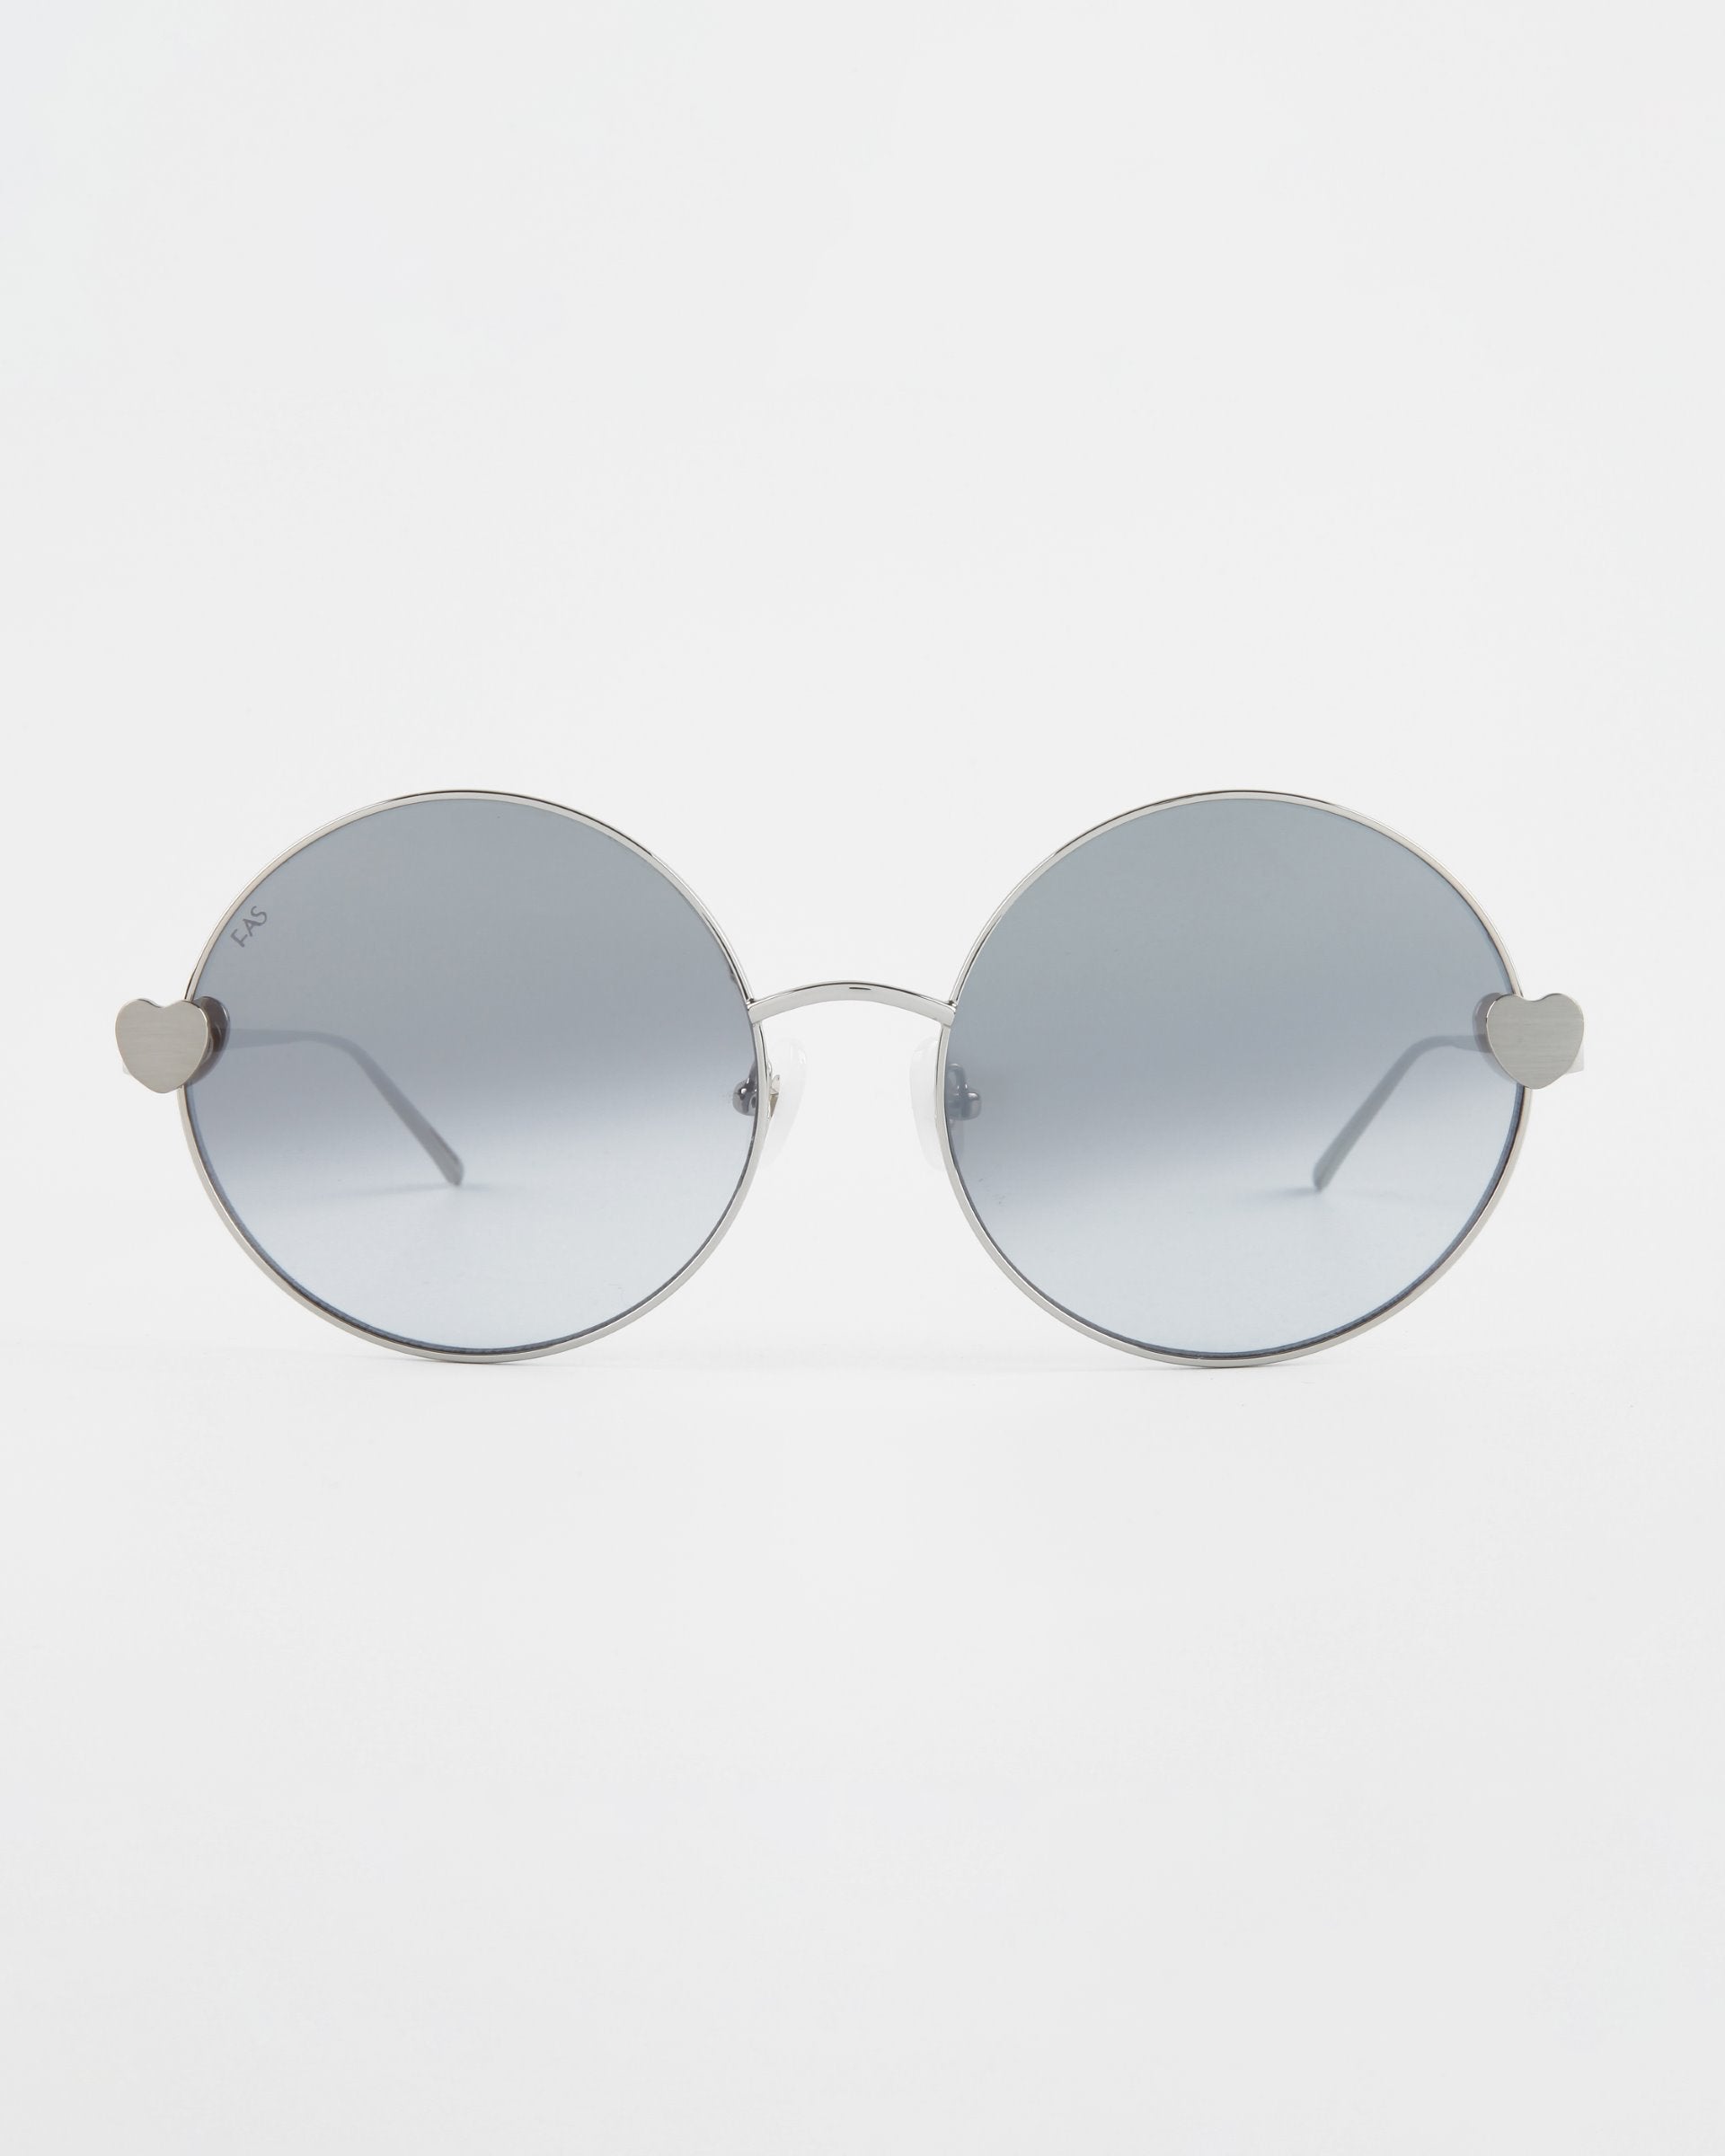 A pair of round For Art's Sake® Love Story shades with thin silver frames and grey-tinted lenses. The hinges on both sides are in the shape of small hearts, adding a unique and playful touch to the minimalist design. Equipped with jadestone nose pads, they also offer 100% UV protection against harmful rays. The background is plain white.